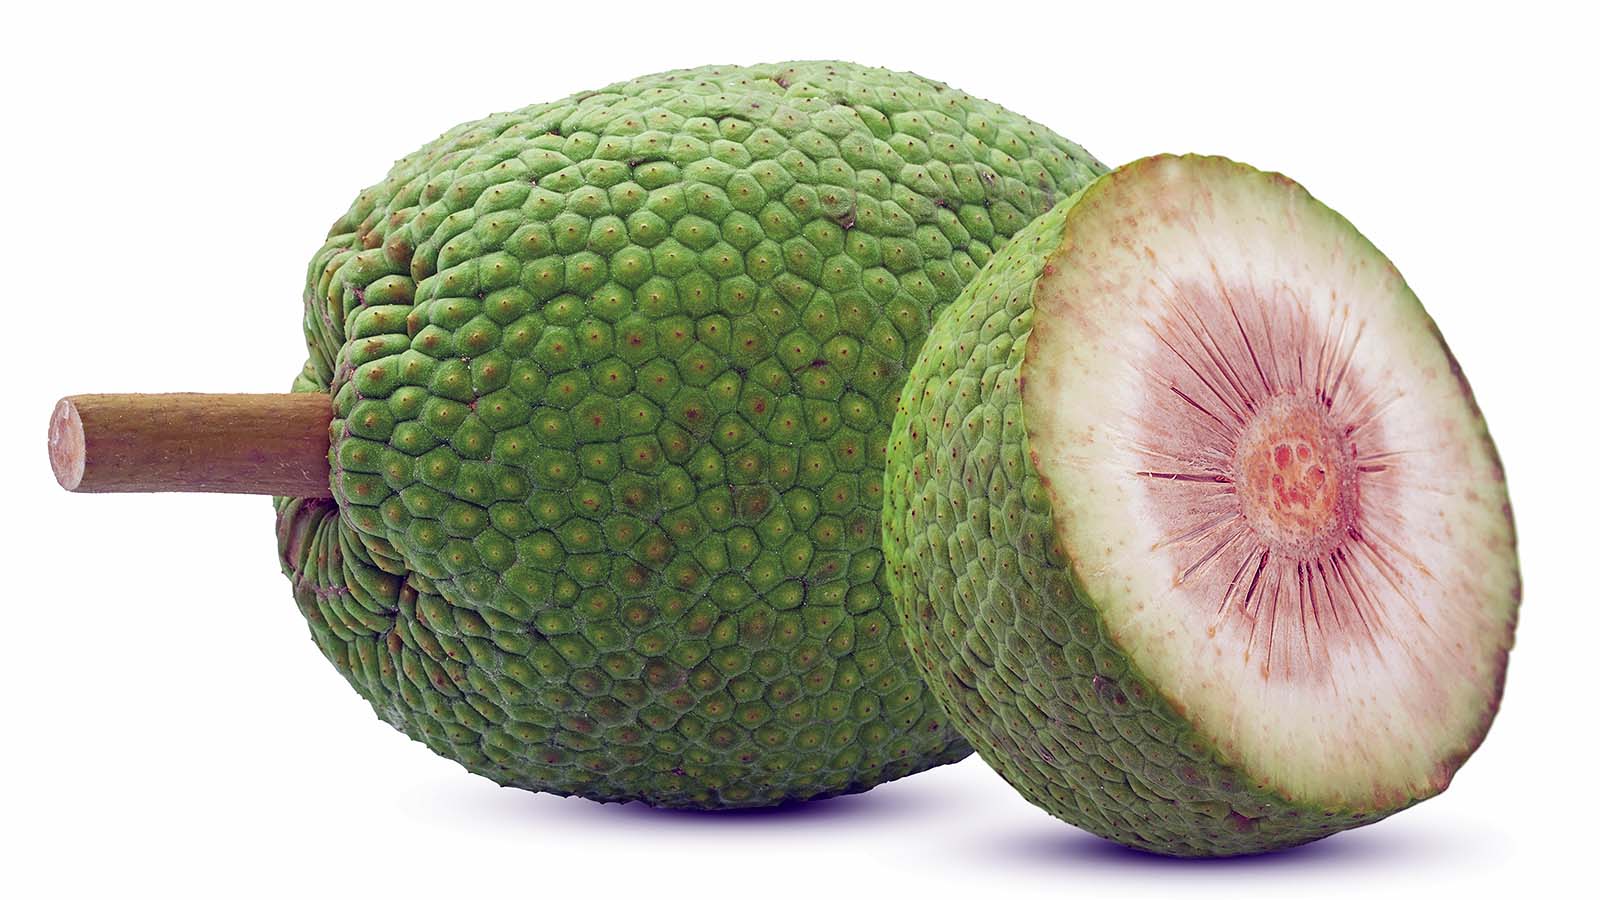 Is breadfruit safe to eat?